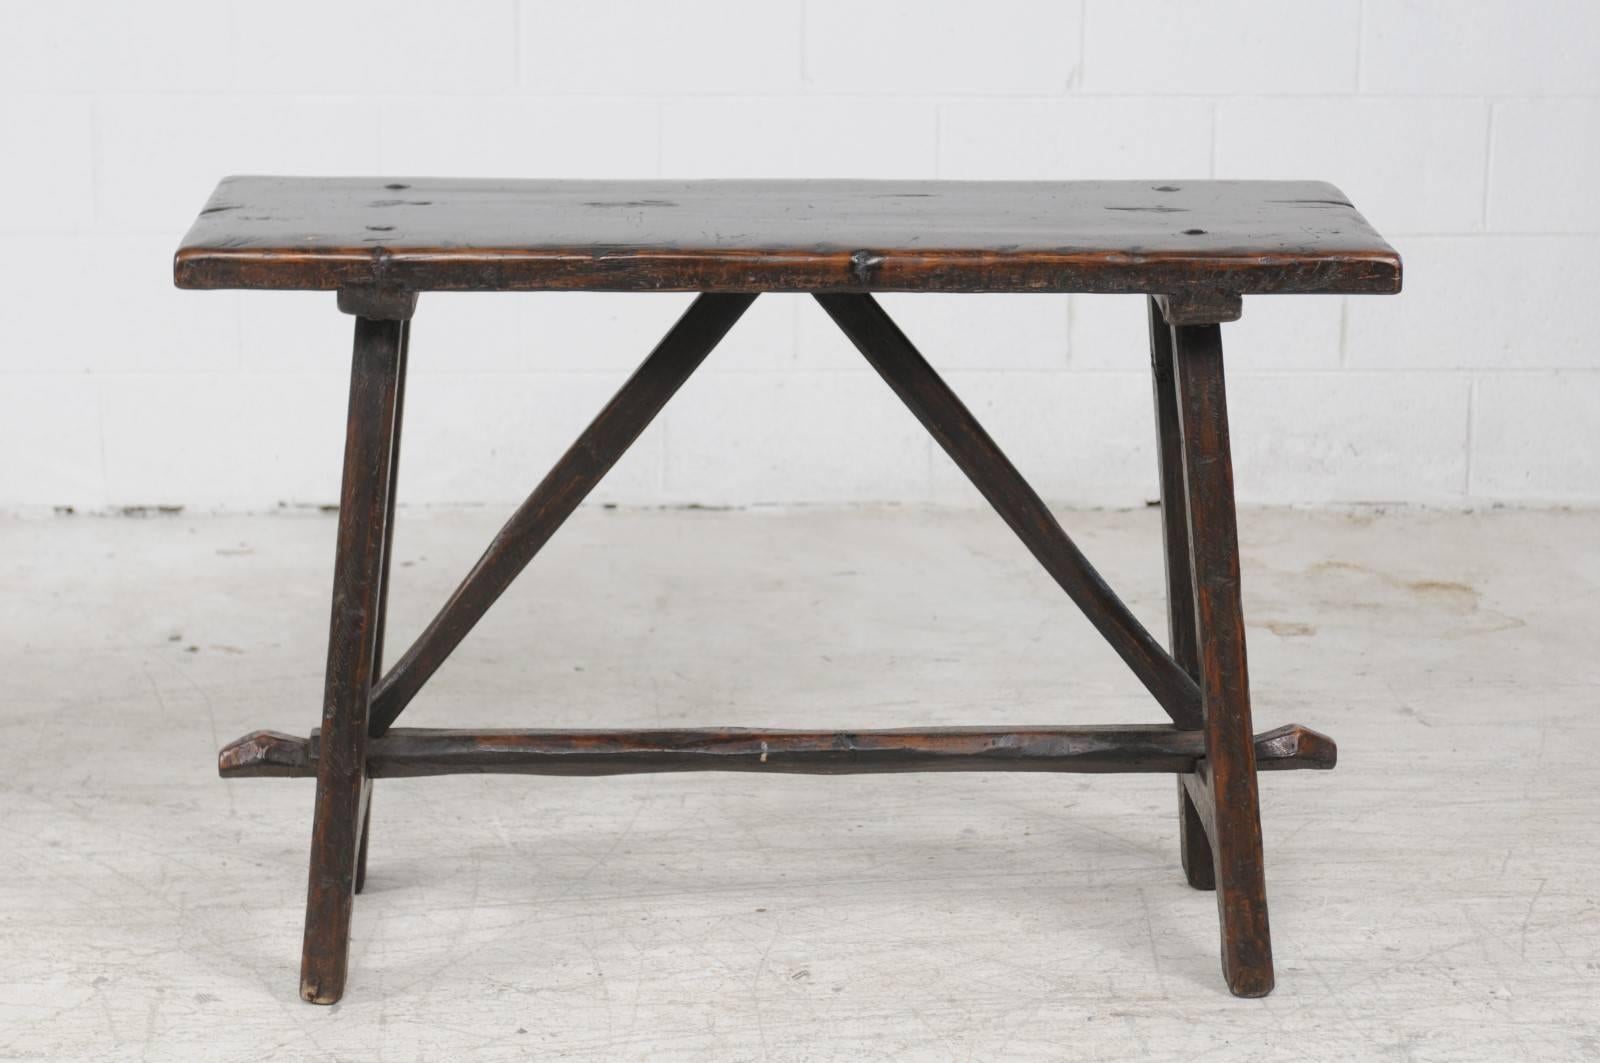 19th Century Pair of Italian 1820s Walnut Console Tables with Trestle Base and Splayed Legs